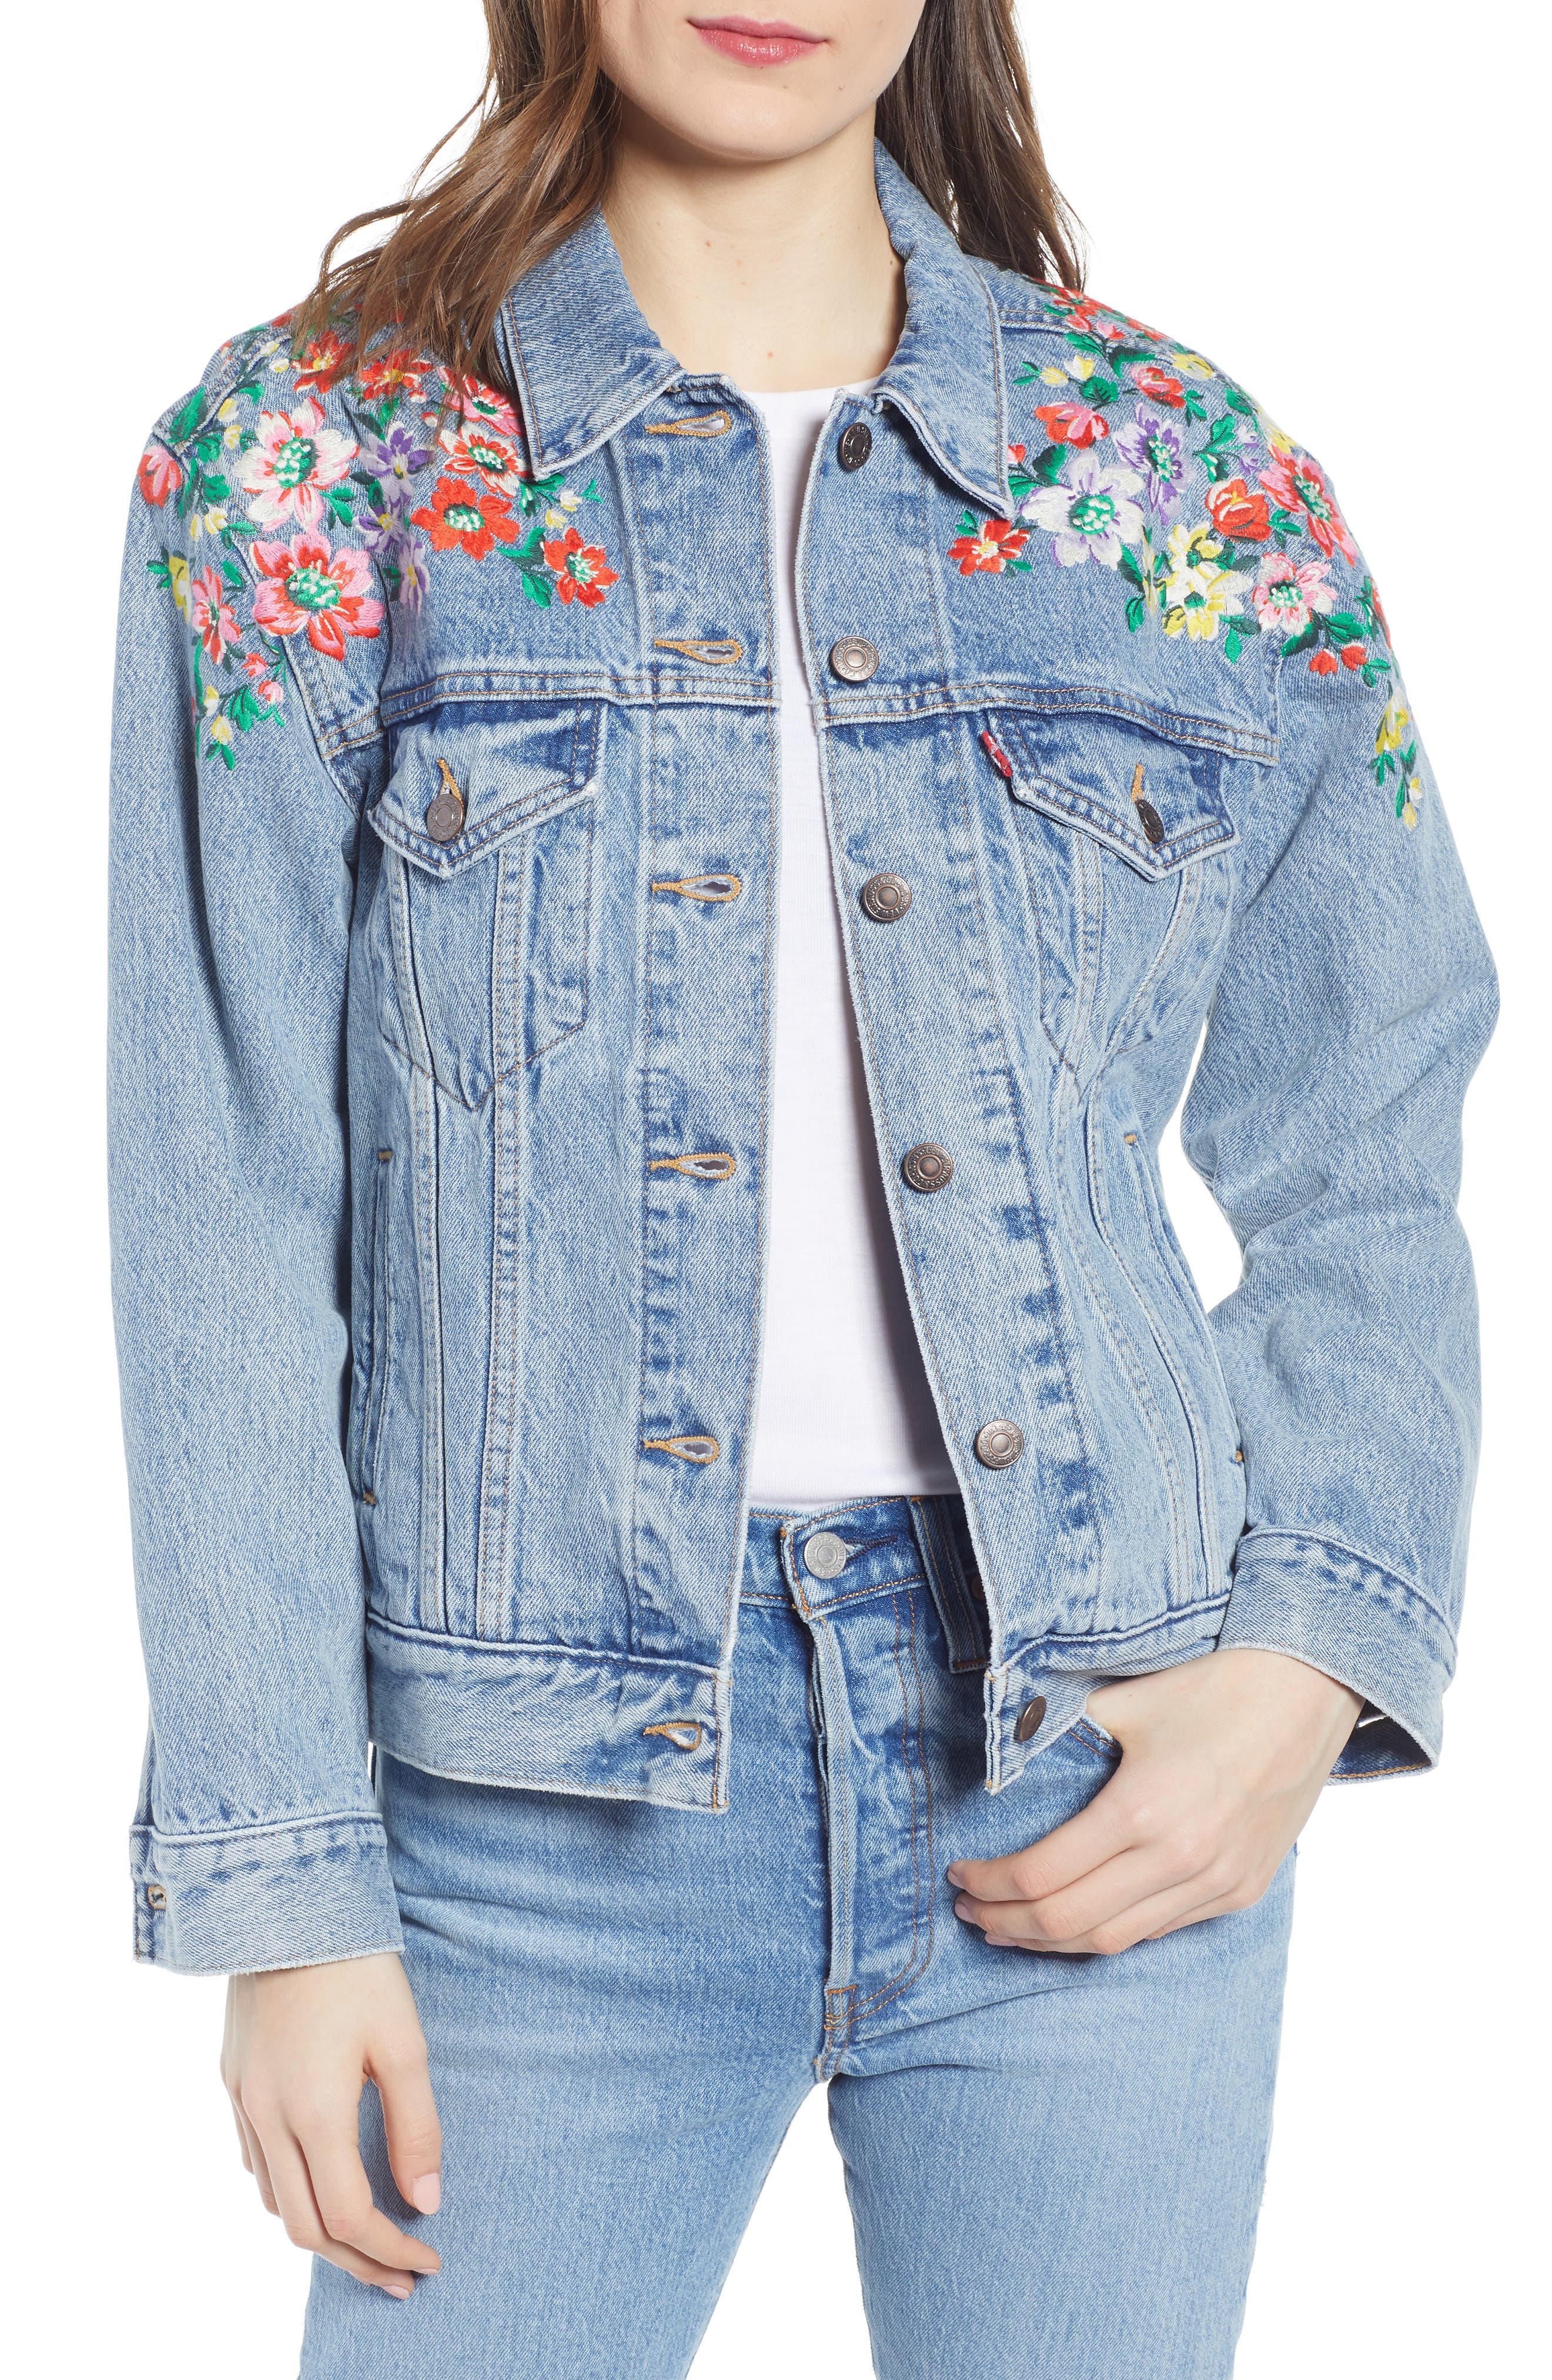 levis denim jacket with embroidery